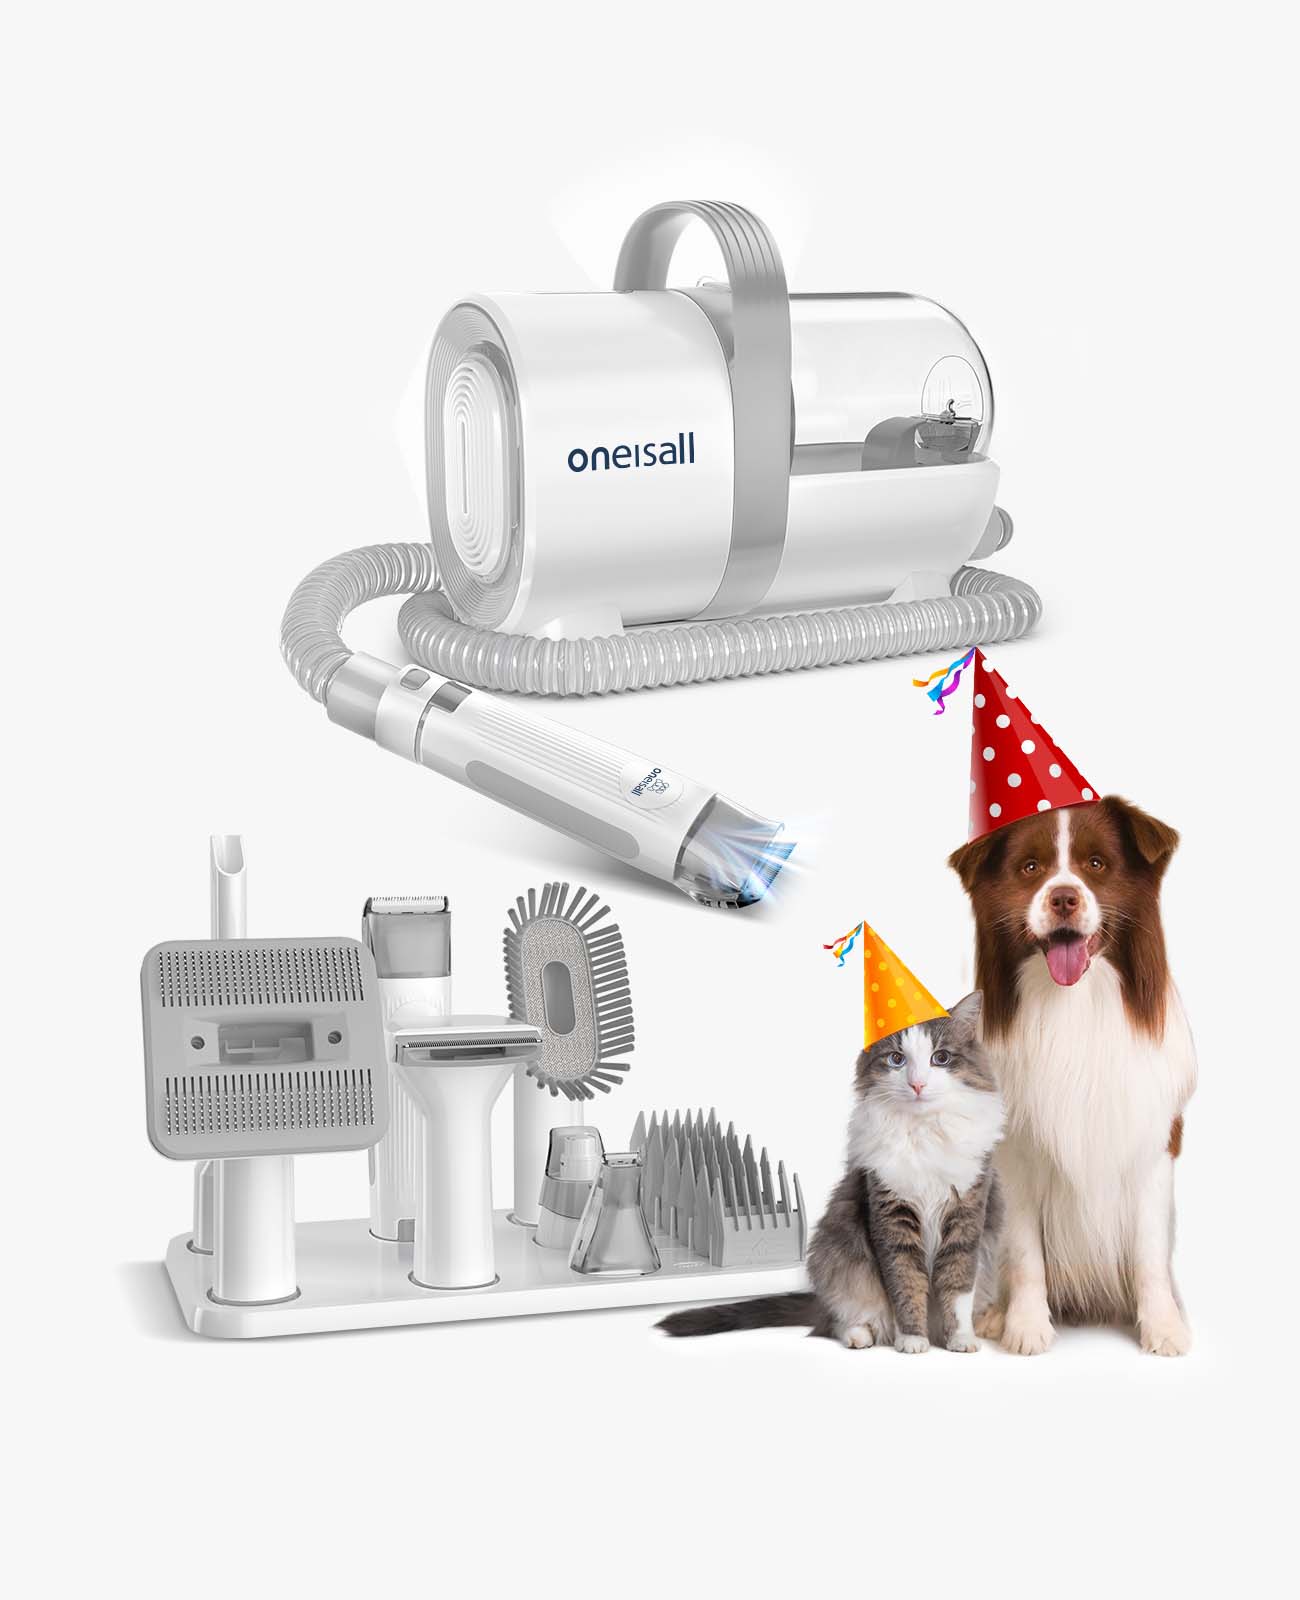 LM2 - Oneisall Dog Grooming Vacuum Kit with 7 in 1